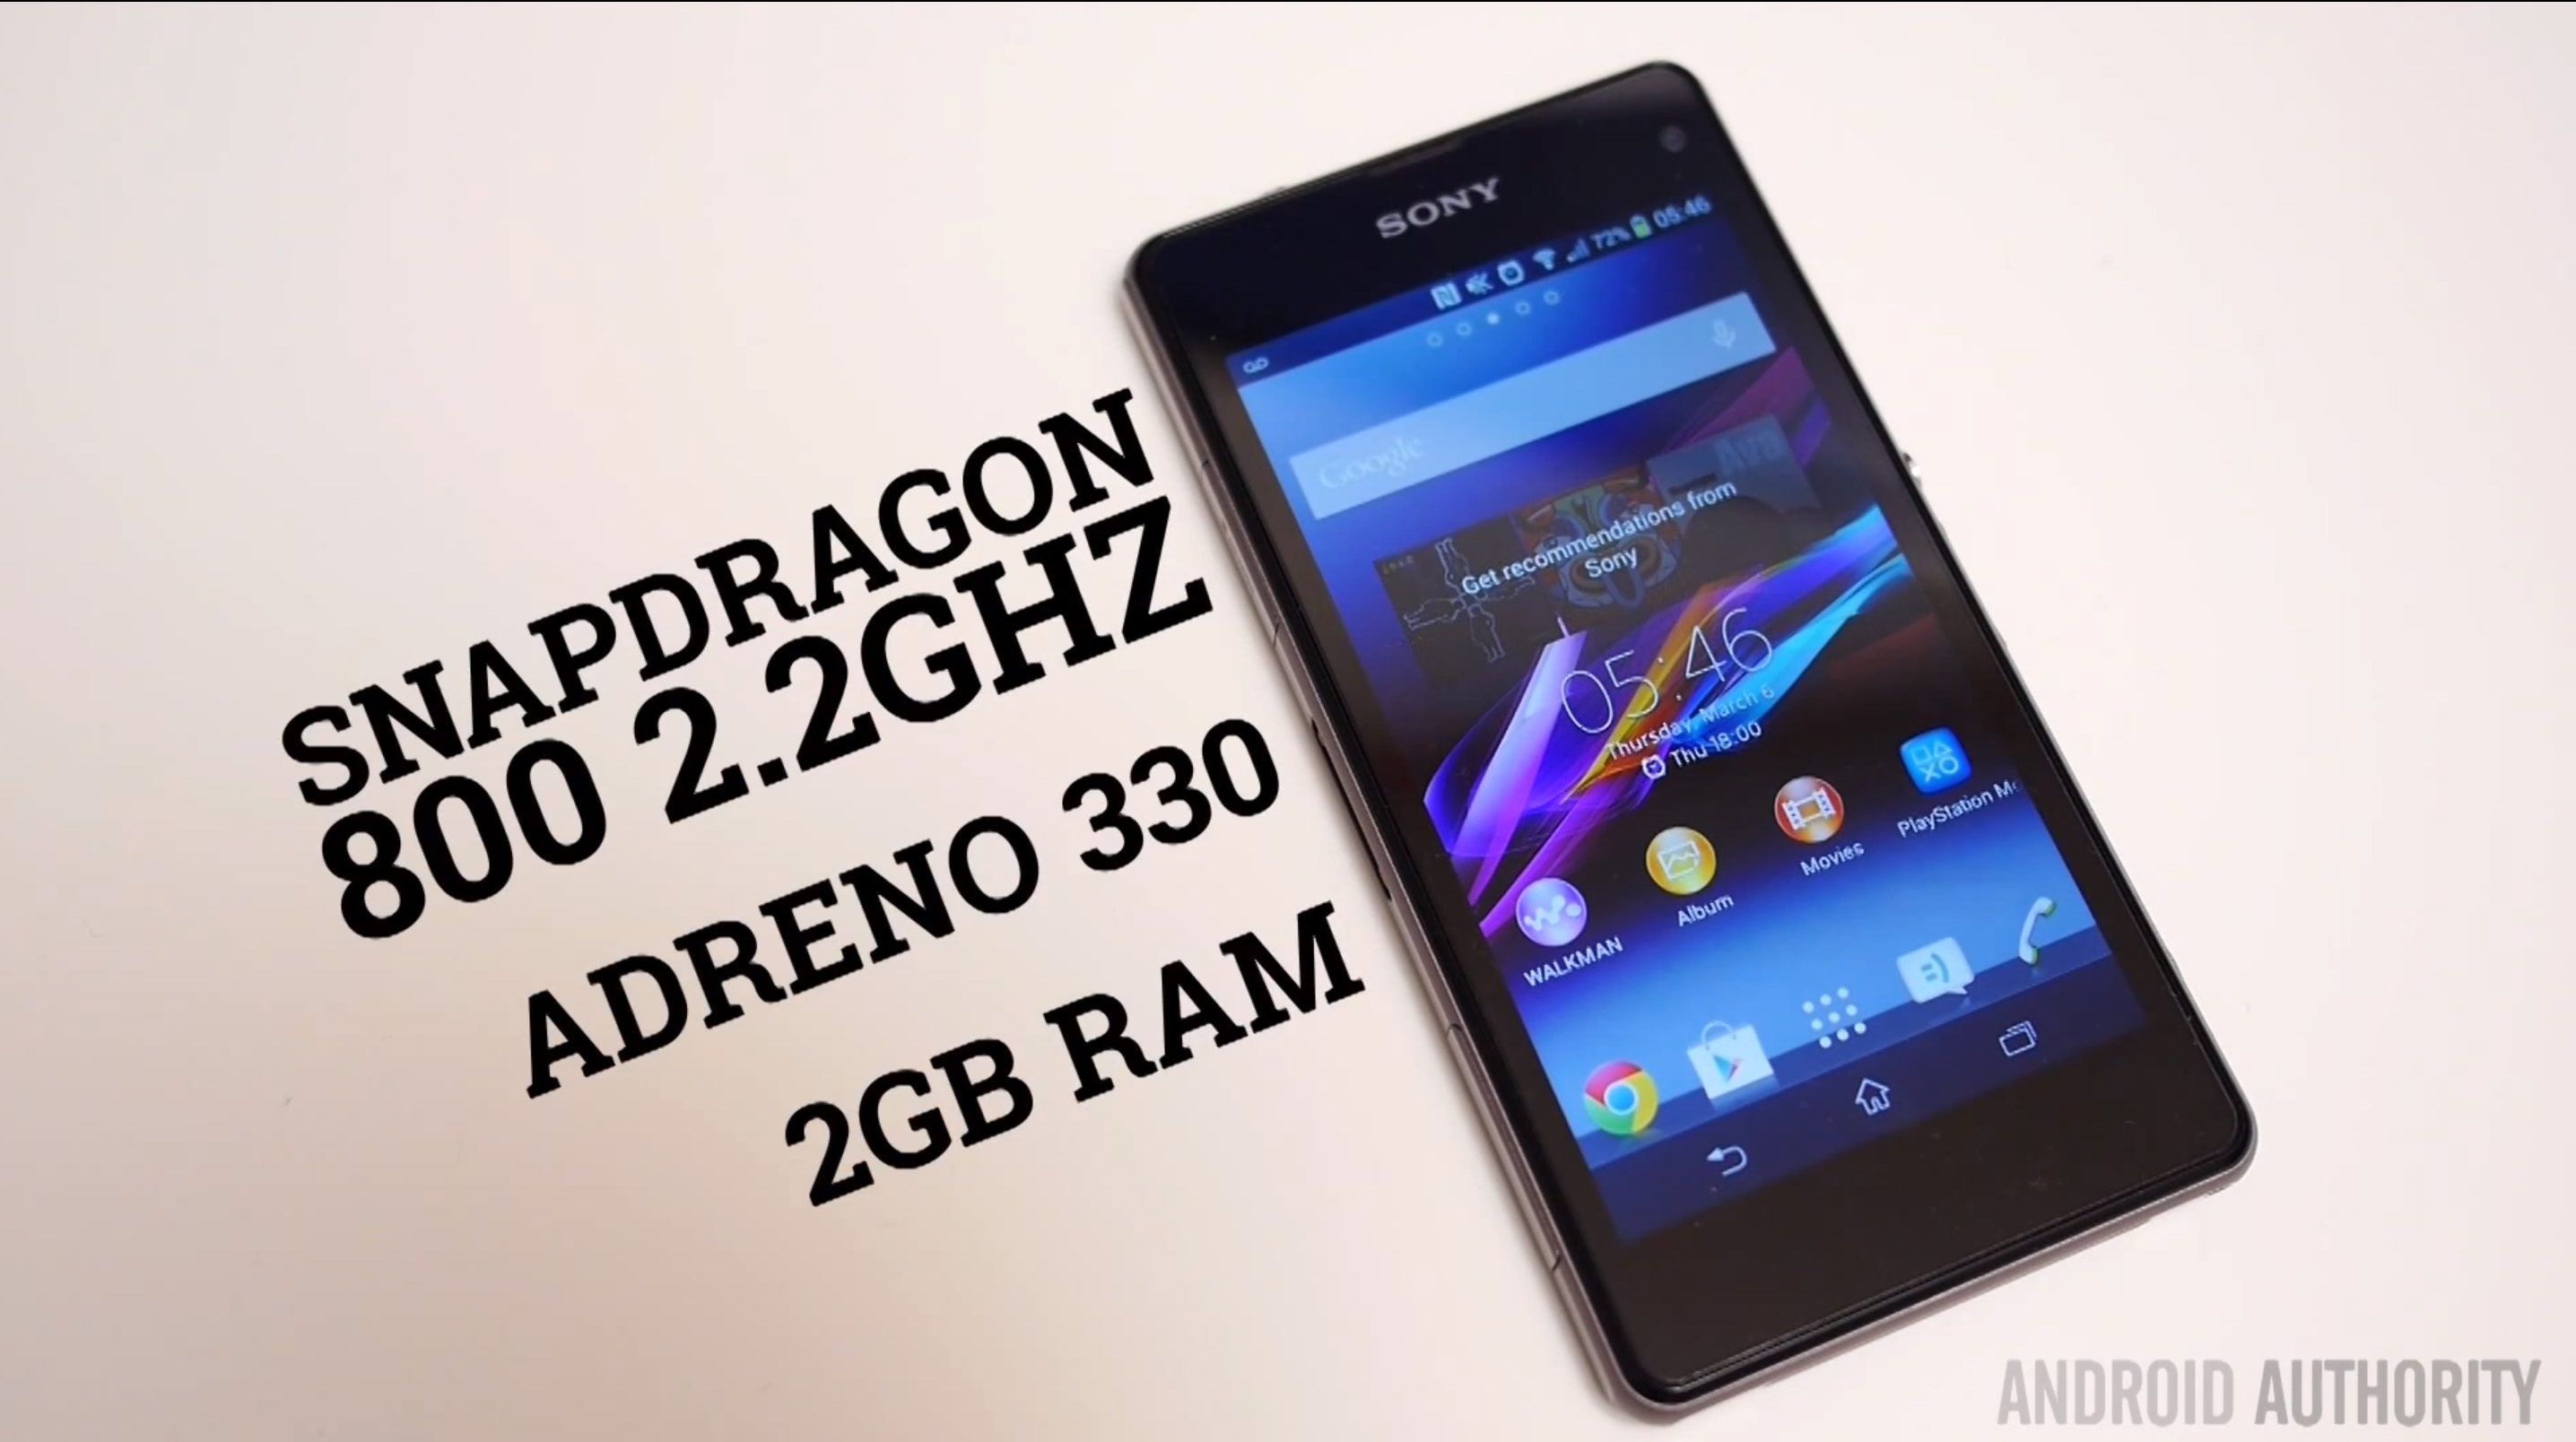 Sony Xperia Z1 Compact Performance